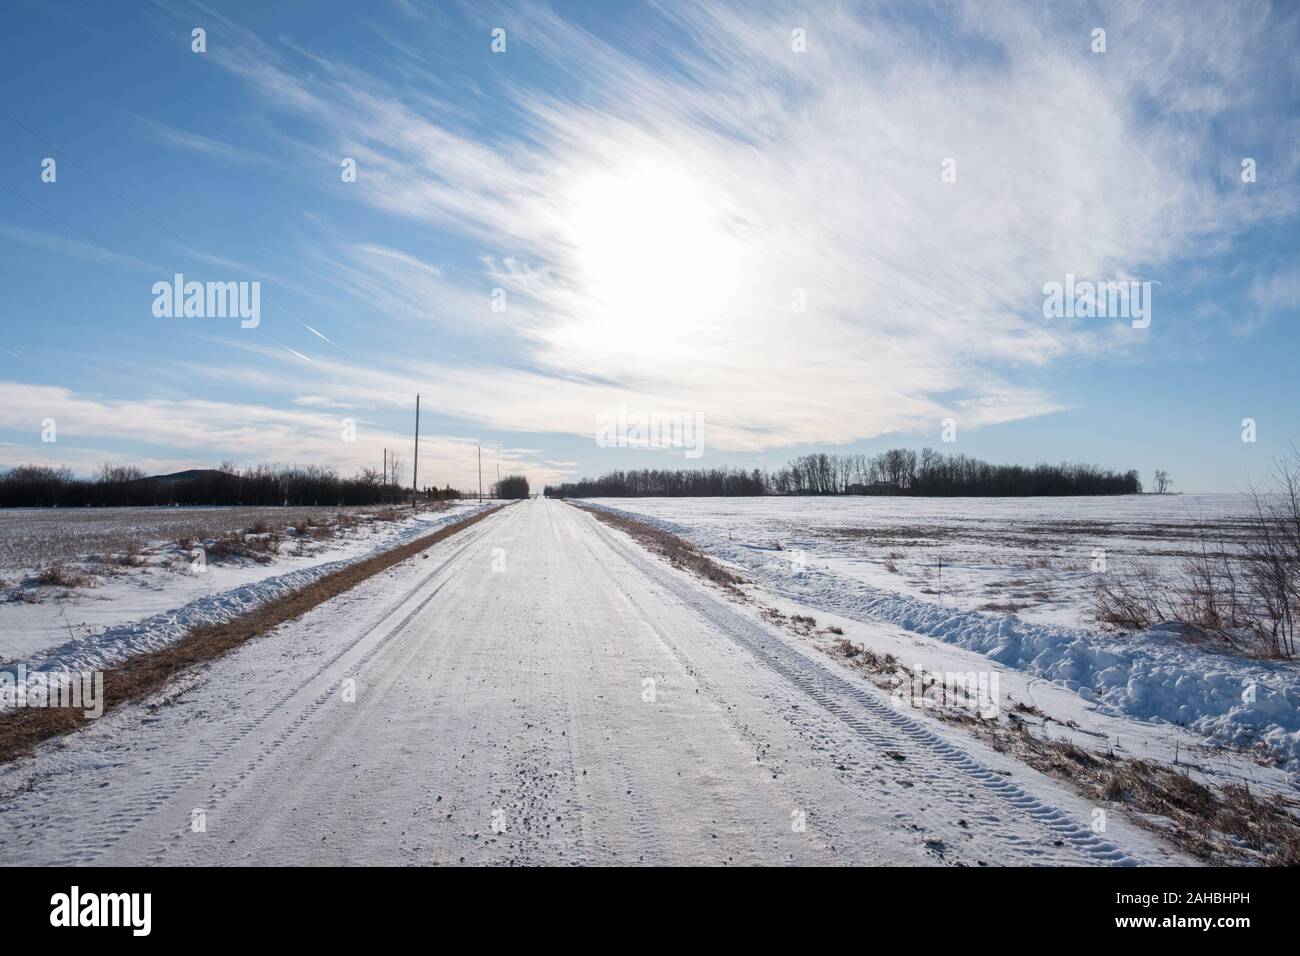 Country Road in Winter, Big Sky Stock Photo